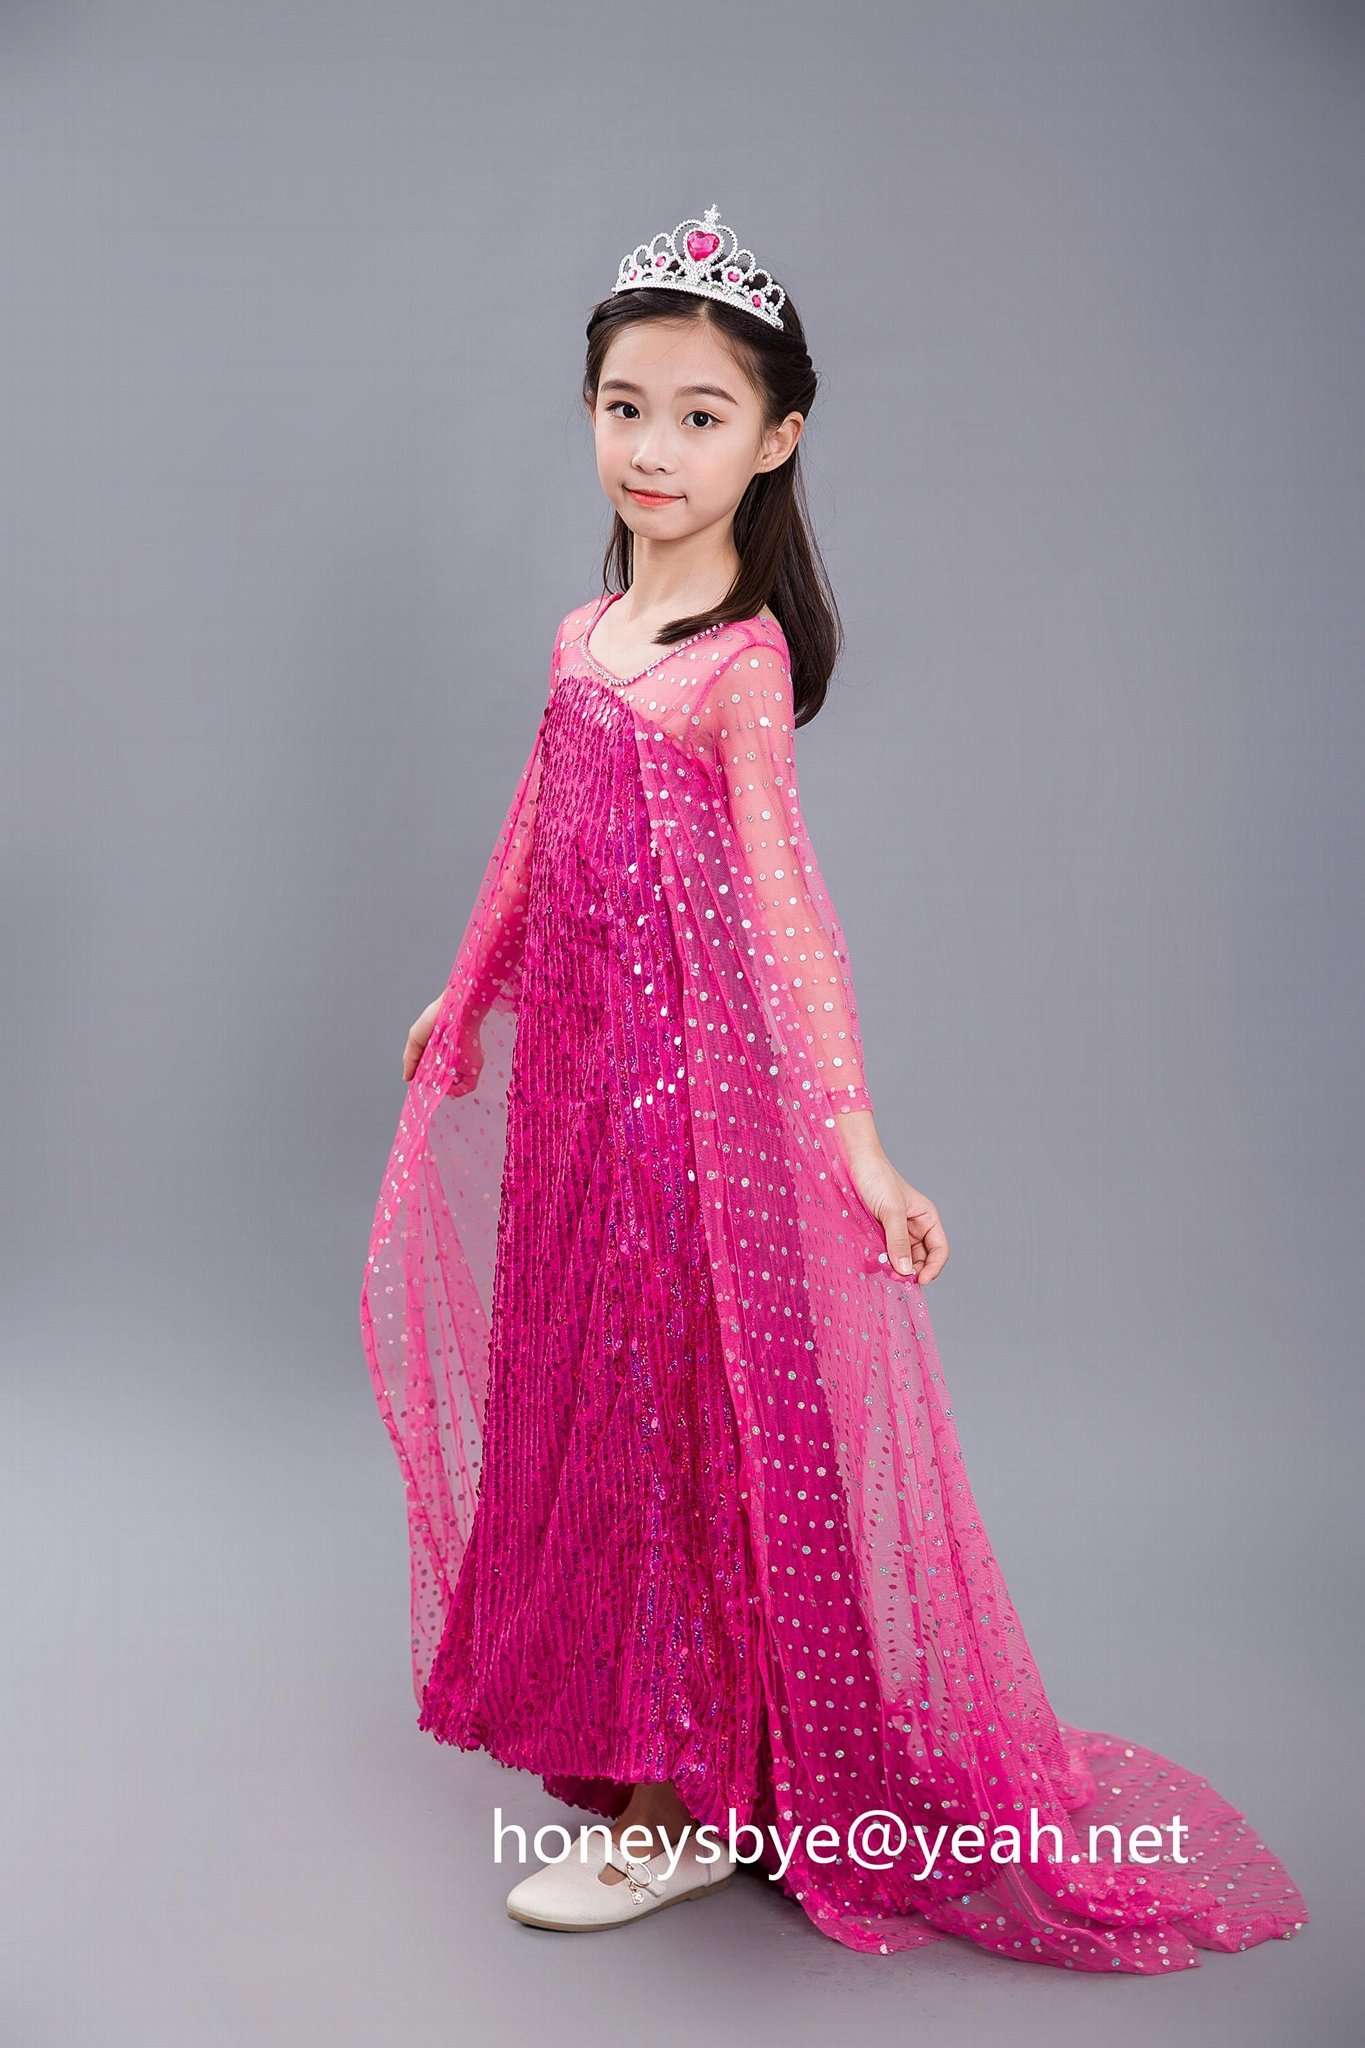 Party Dress Princess Dress for Elsa Costumes with Shining Long Cap 3